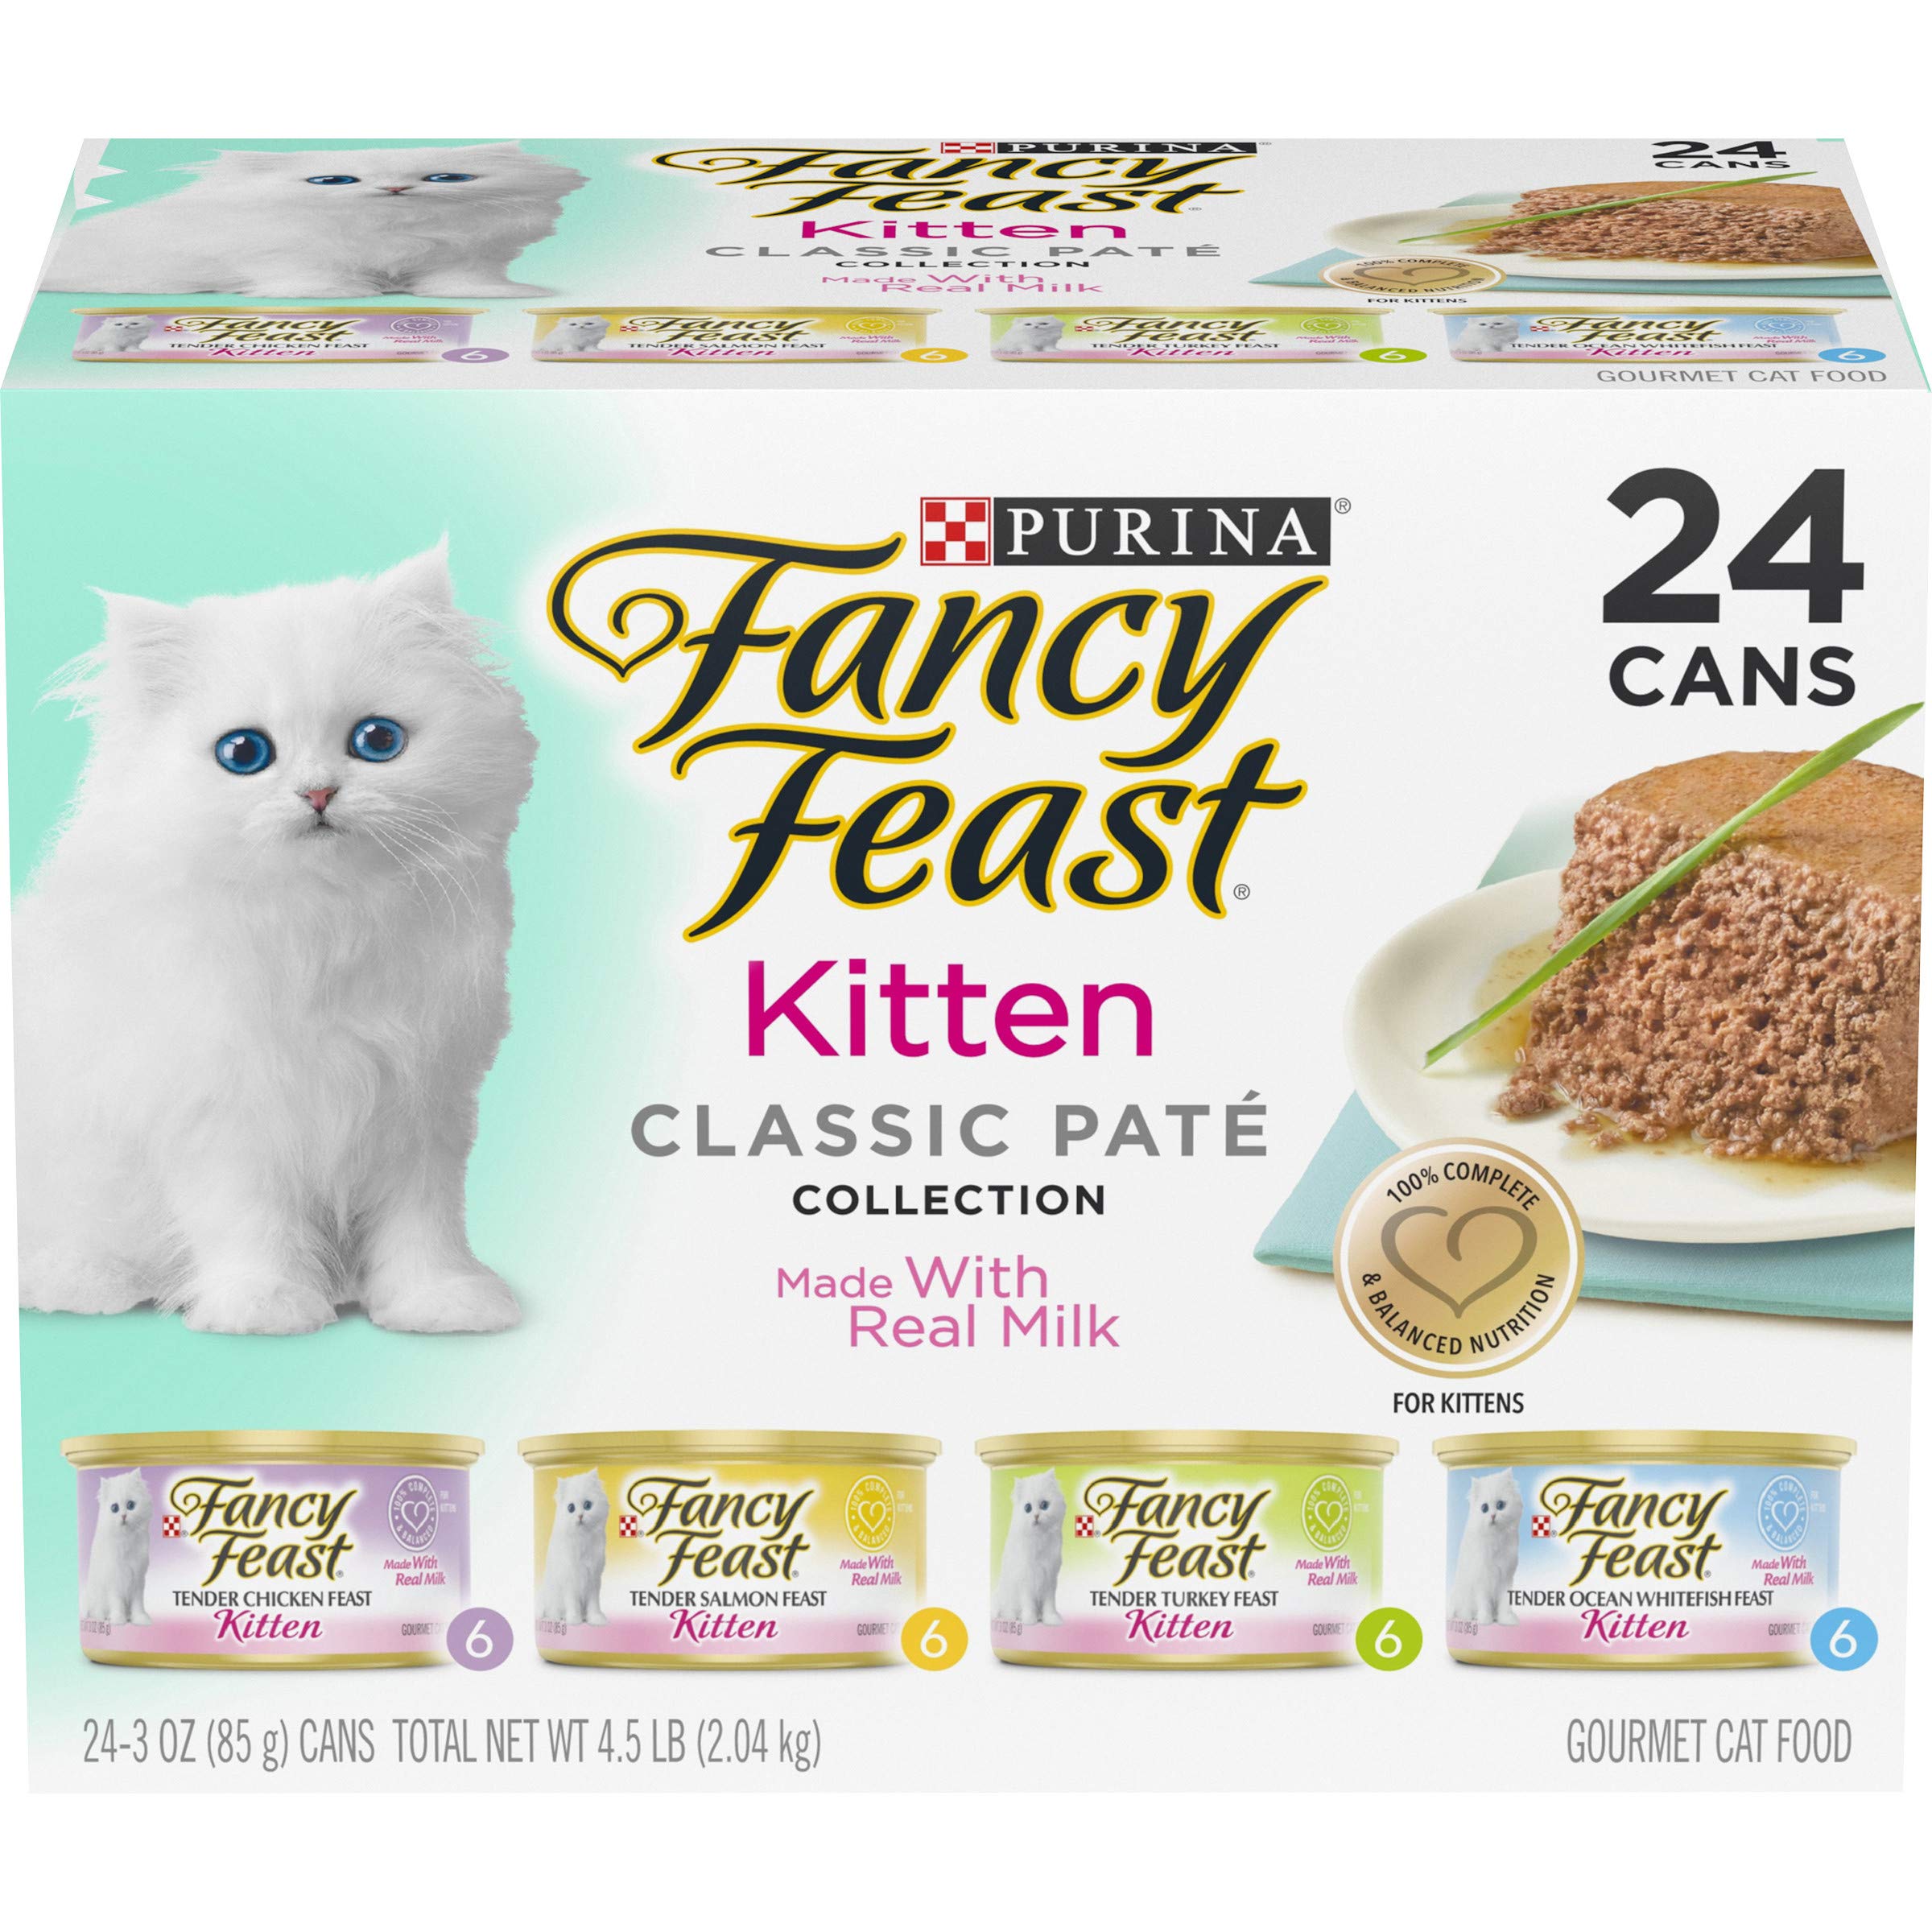 Book Cover Purina Fancy Feast Grain Free Pate Wet Kitten Food Variety Pack, Kitten Classic Pate Collection, 4 flavors - (24) 3 oz. Boxes